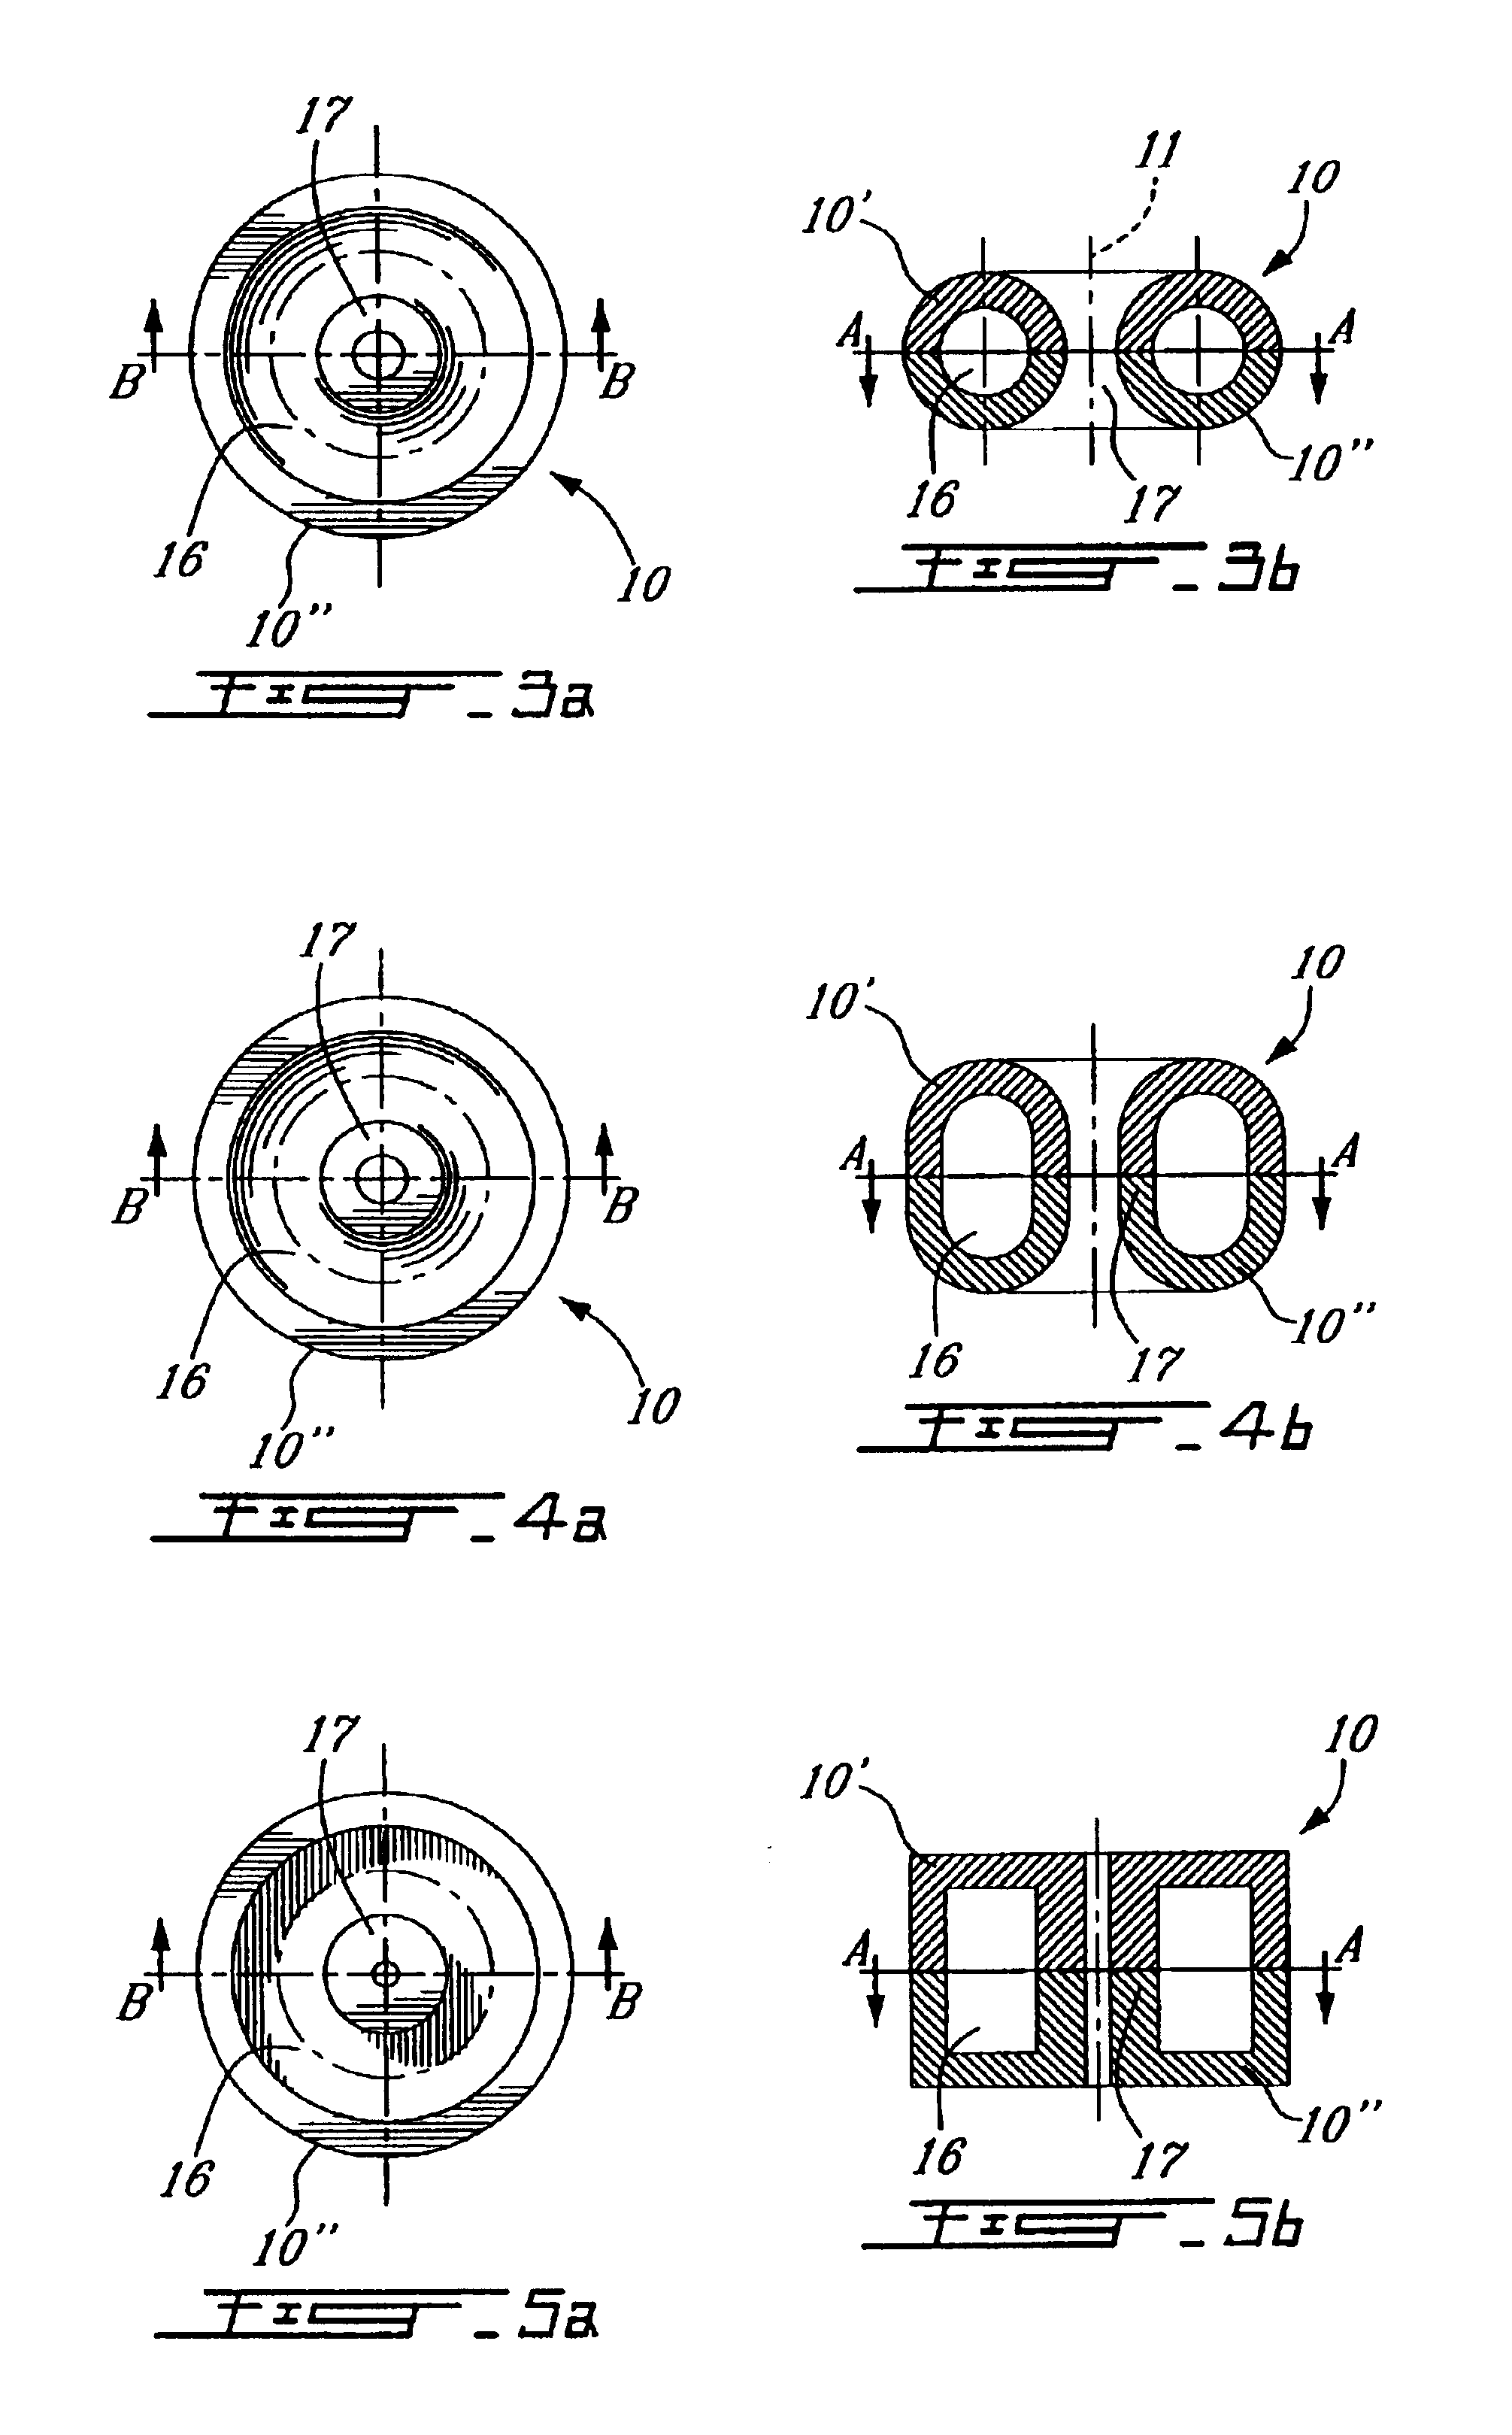 Power transformers and power inductors for low-frequency applications using isotropic material with high power-to-weight ratio